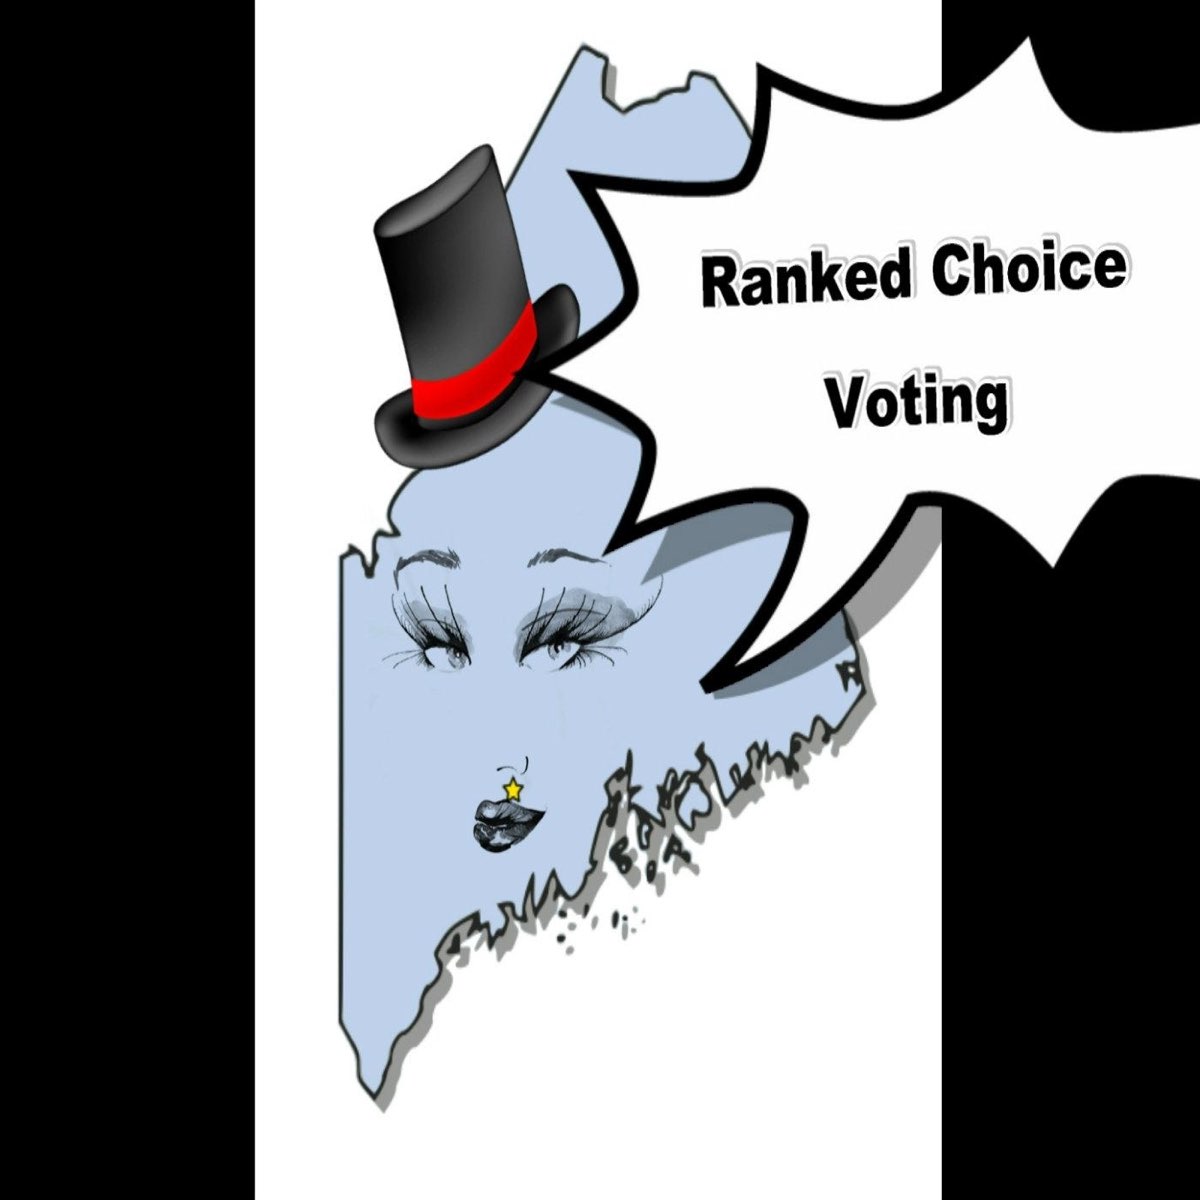 King vote. Ranked choice voting.